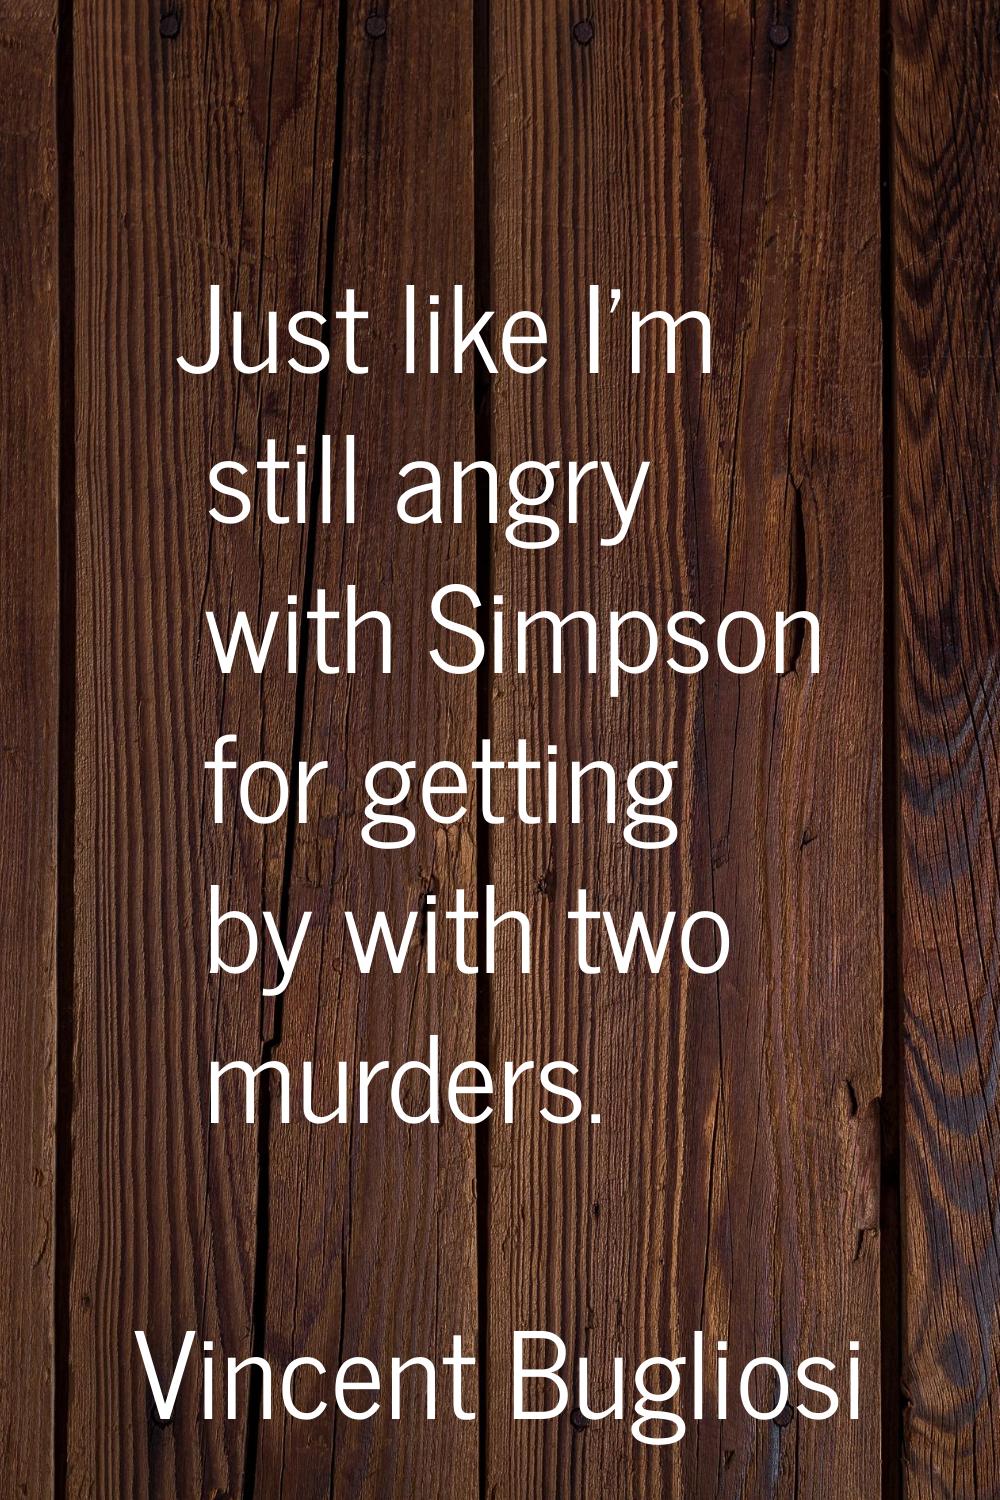 Just like I'm still angry with Simpson for getting by with two murders.